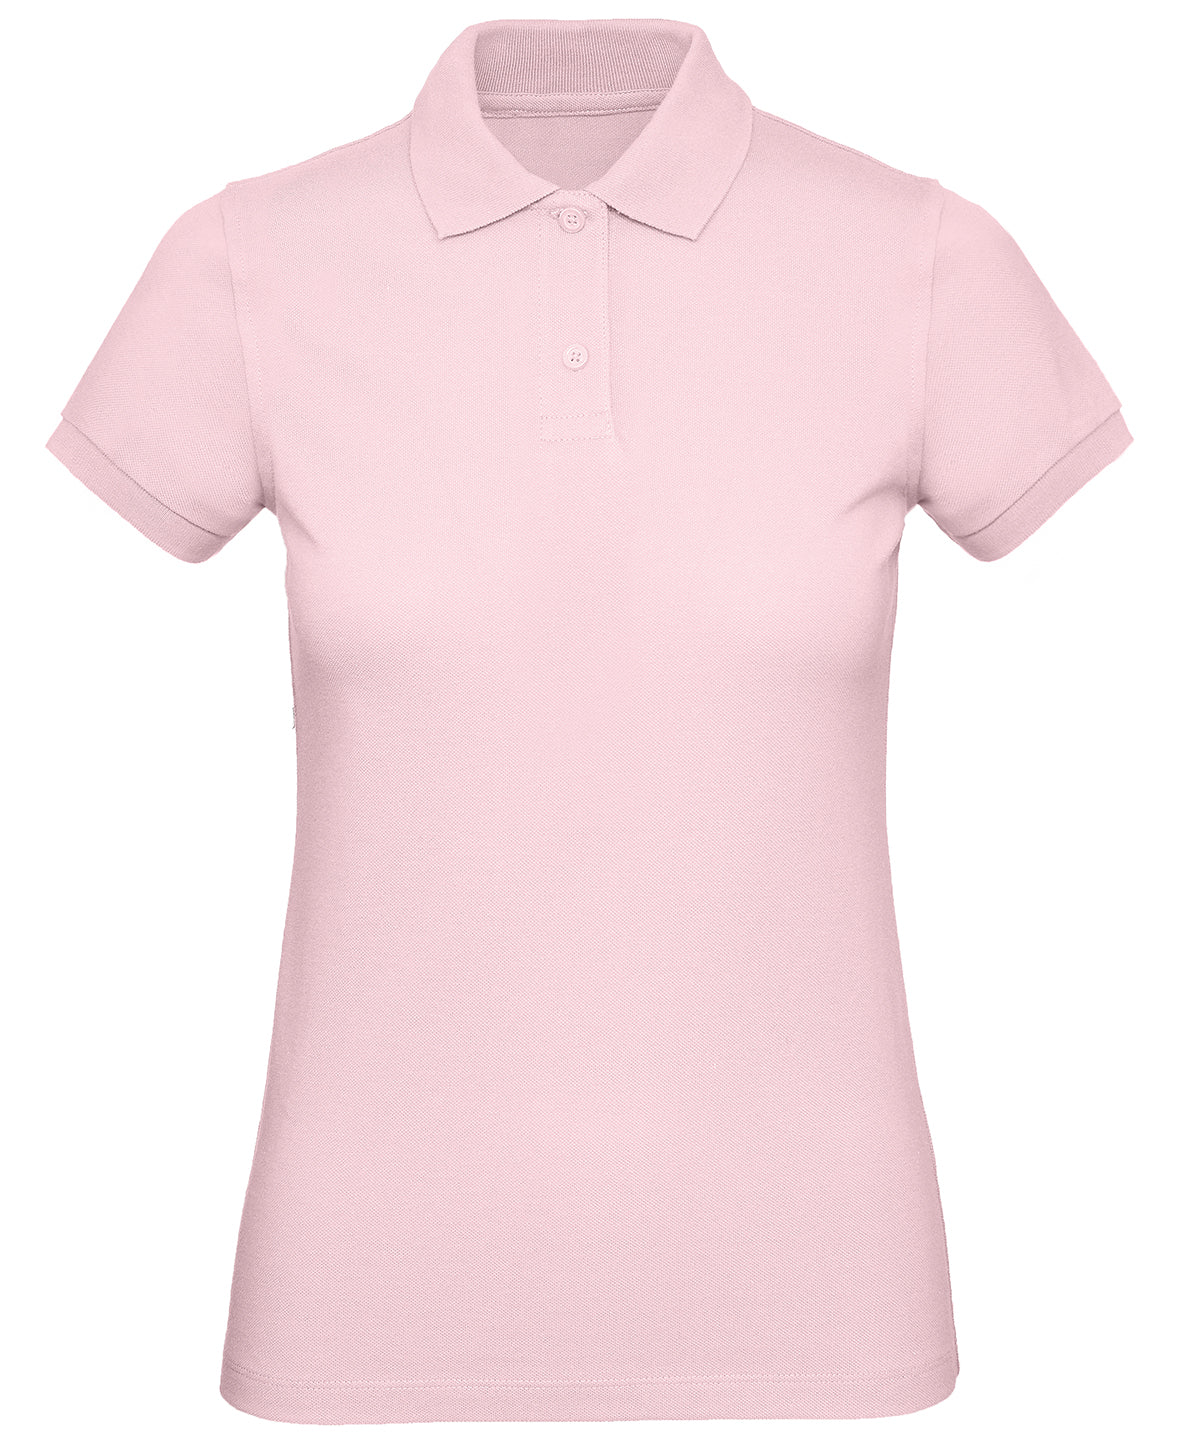 Personalised Polo Shirts - Navy B&C Collection B&C Inspire Polo /women